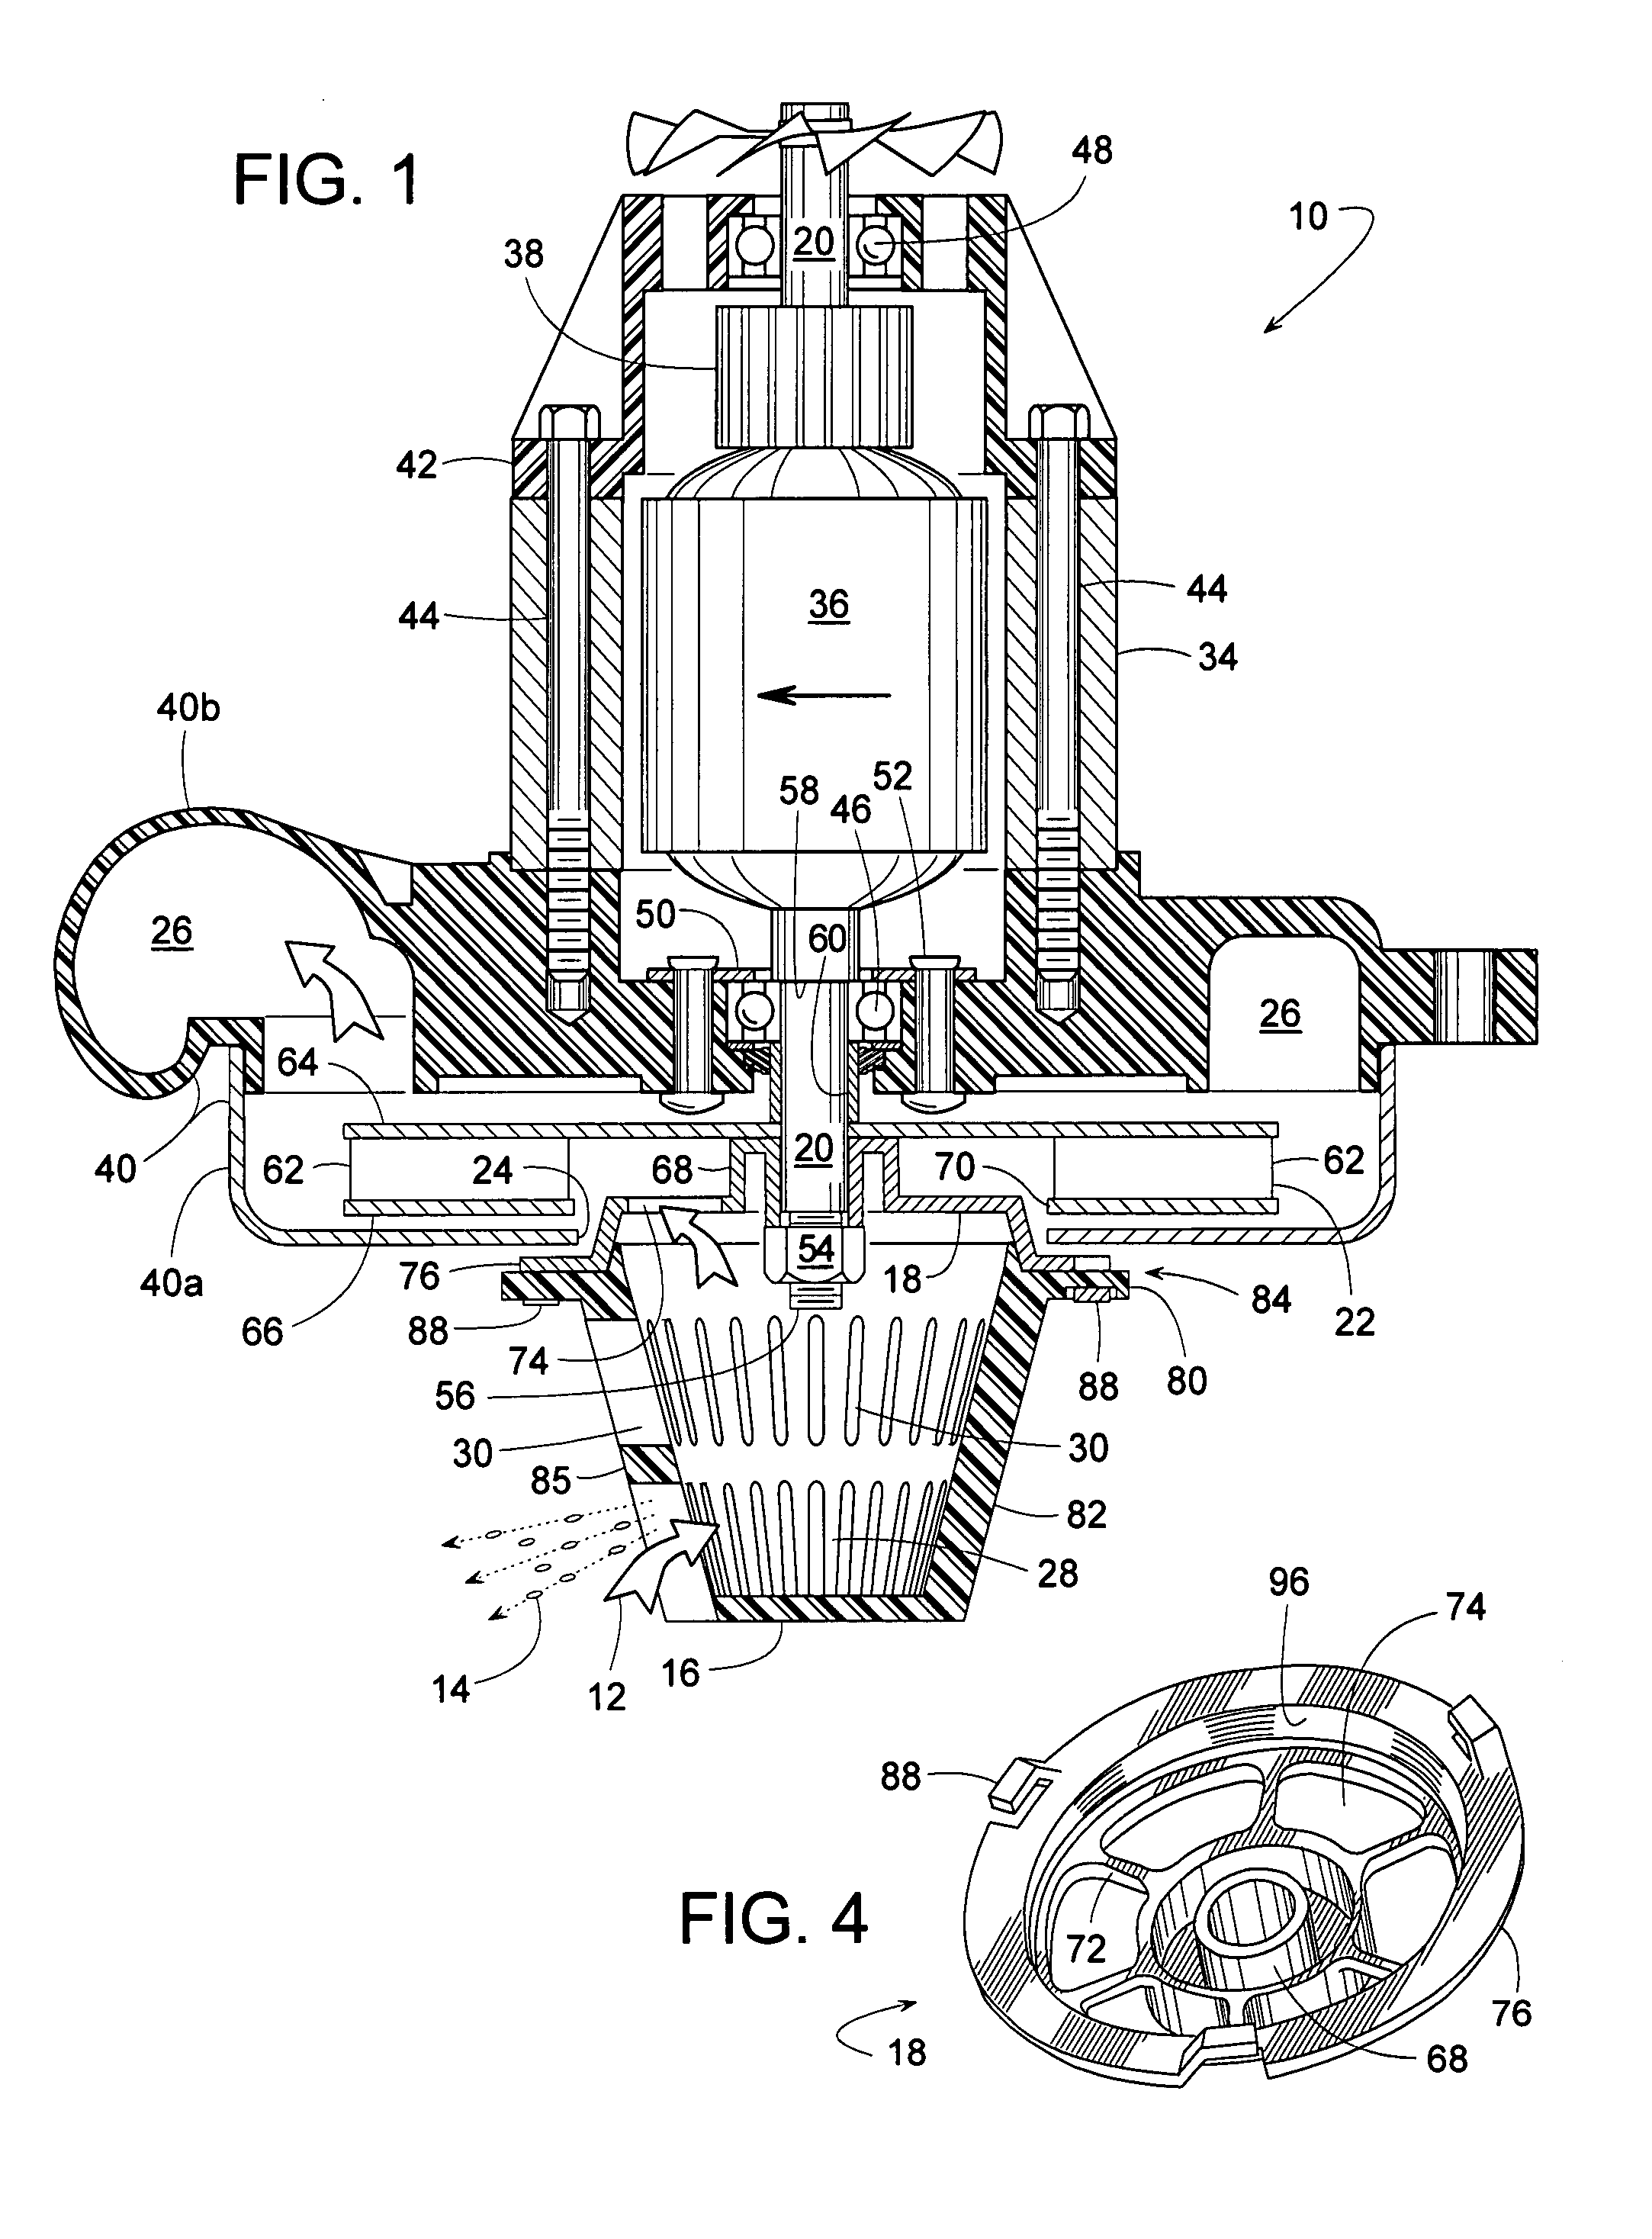 Removable gas/liquid separator for a motor